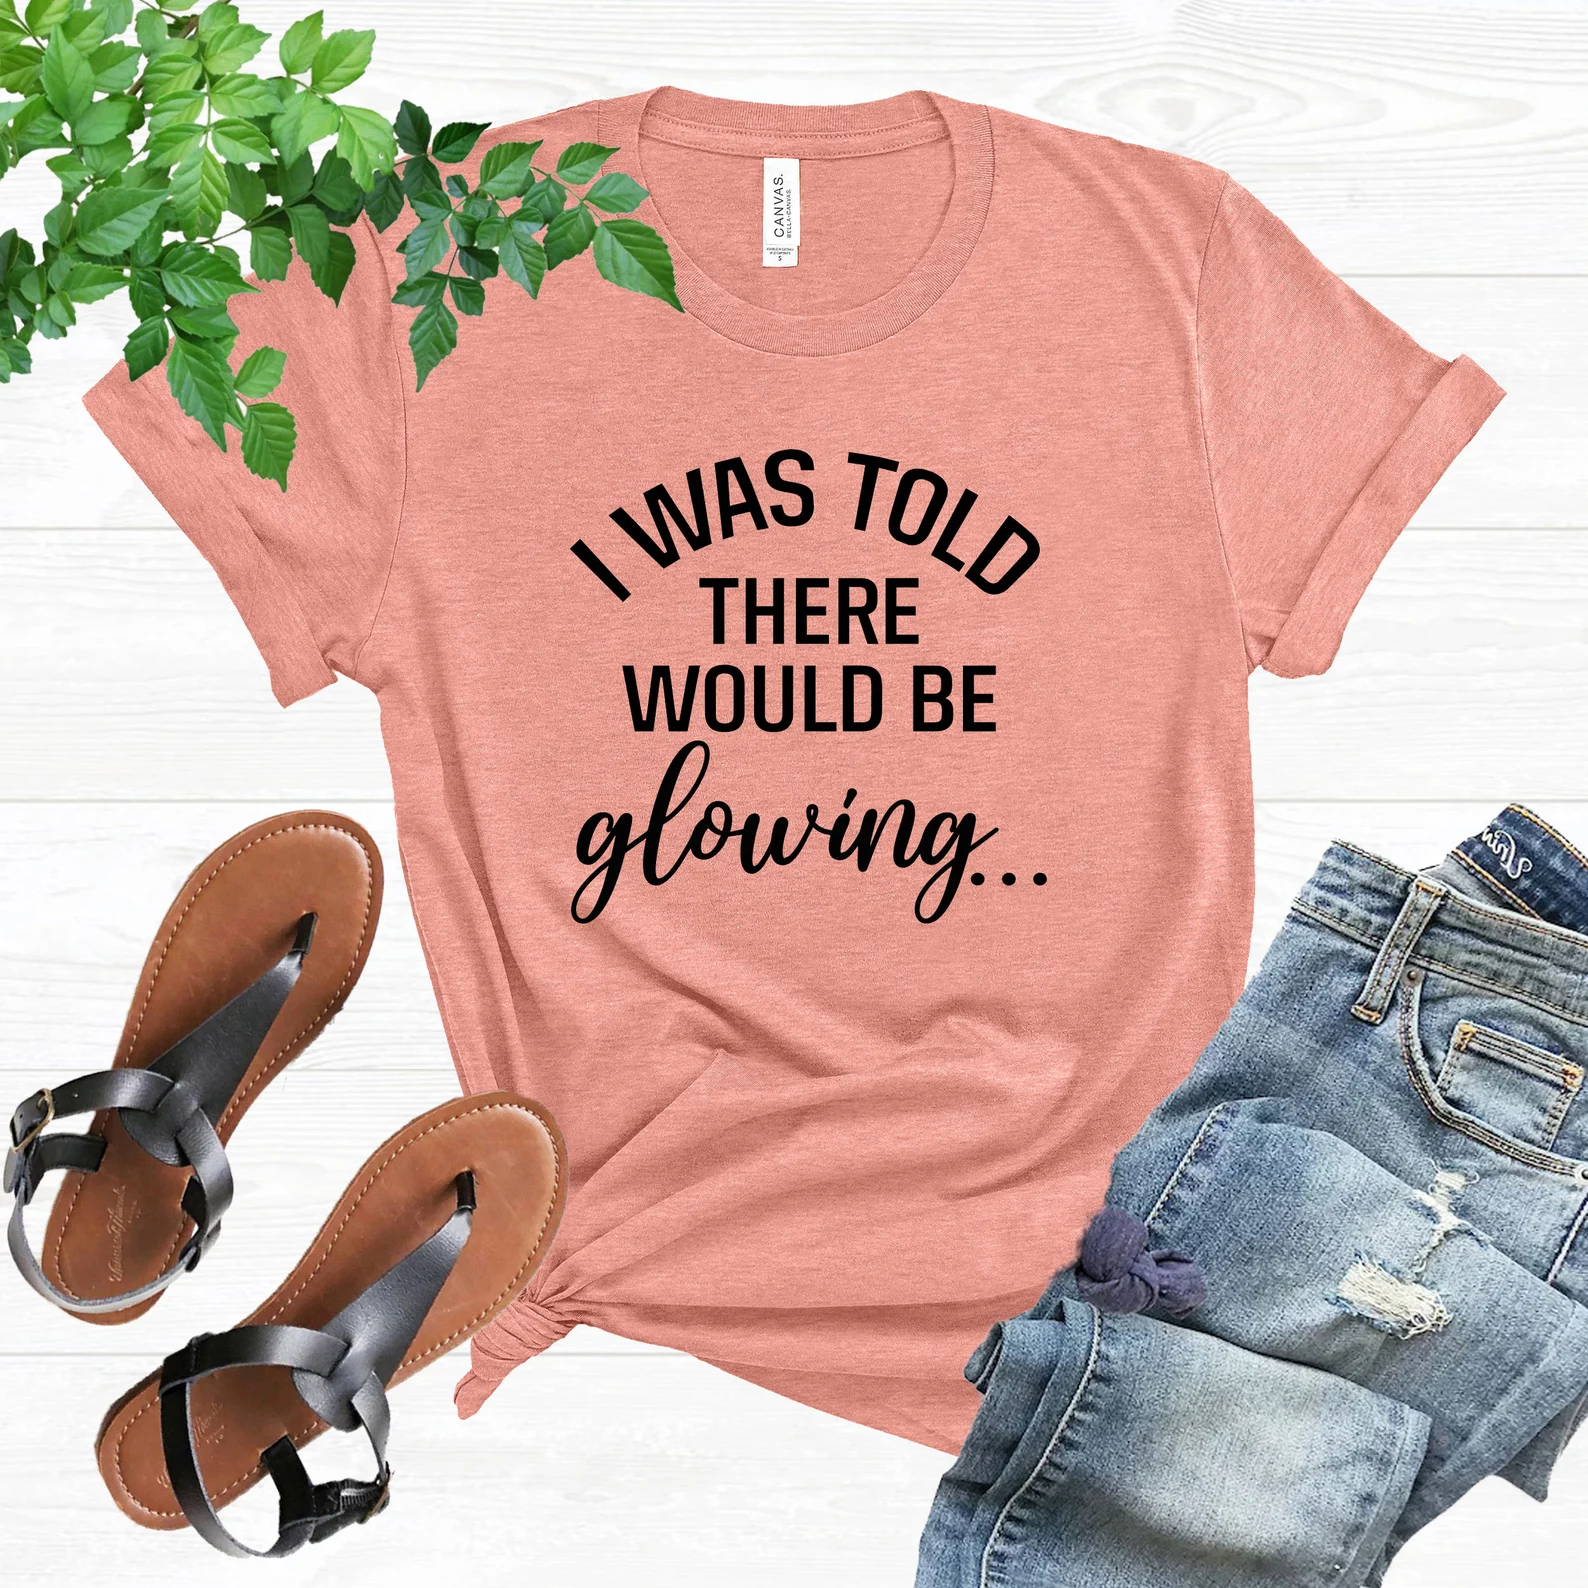 Peach pregnancy announcement t-shirt with jeans and sandals 